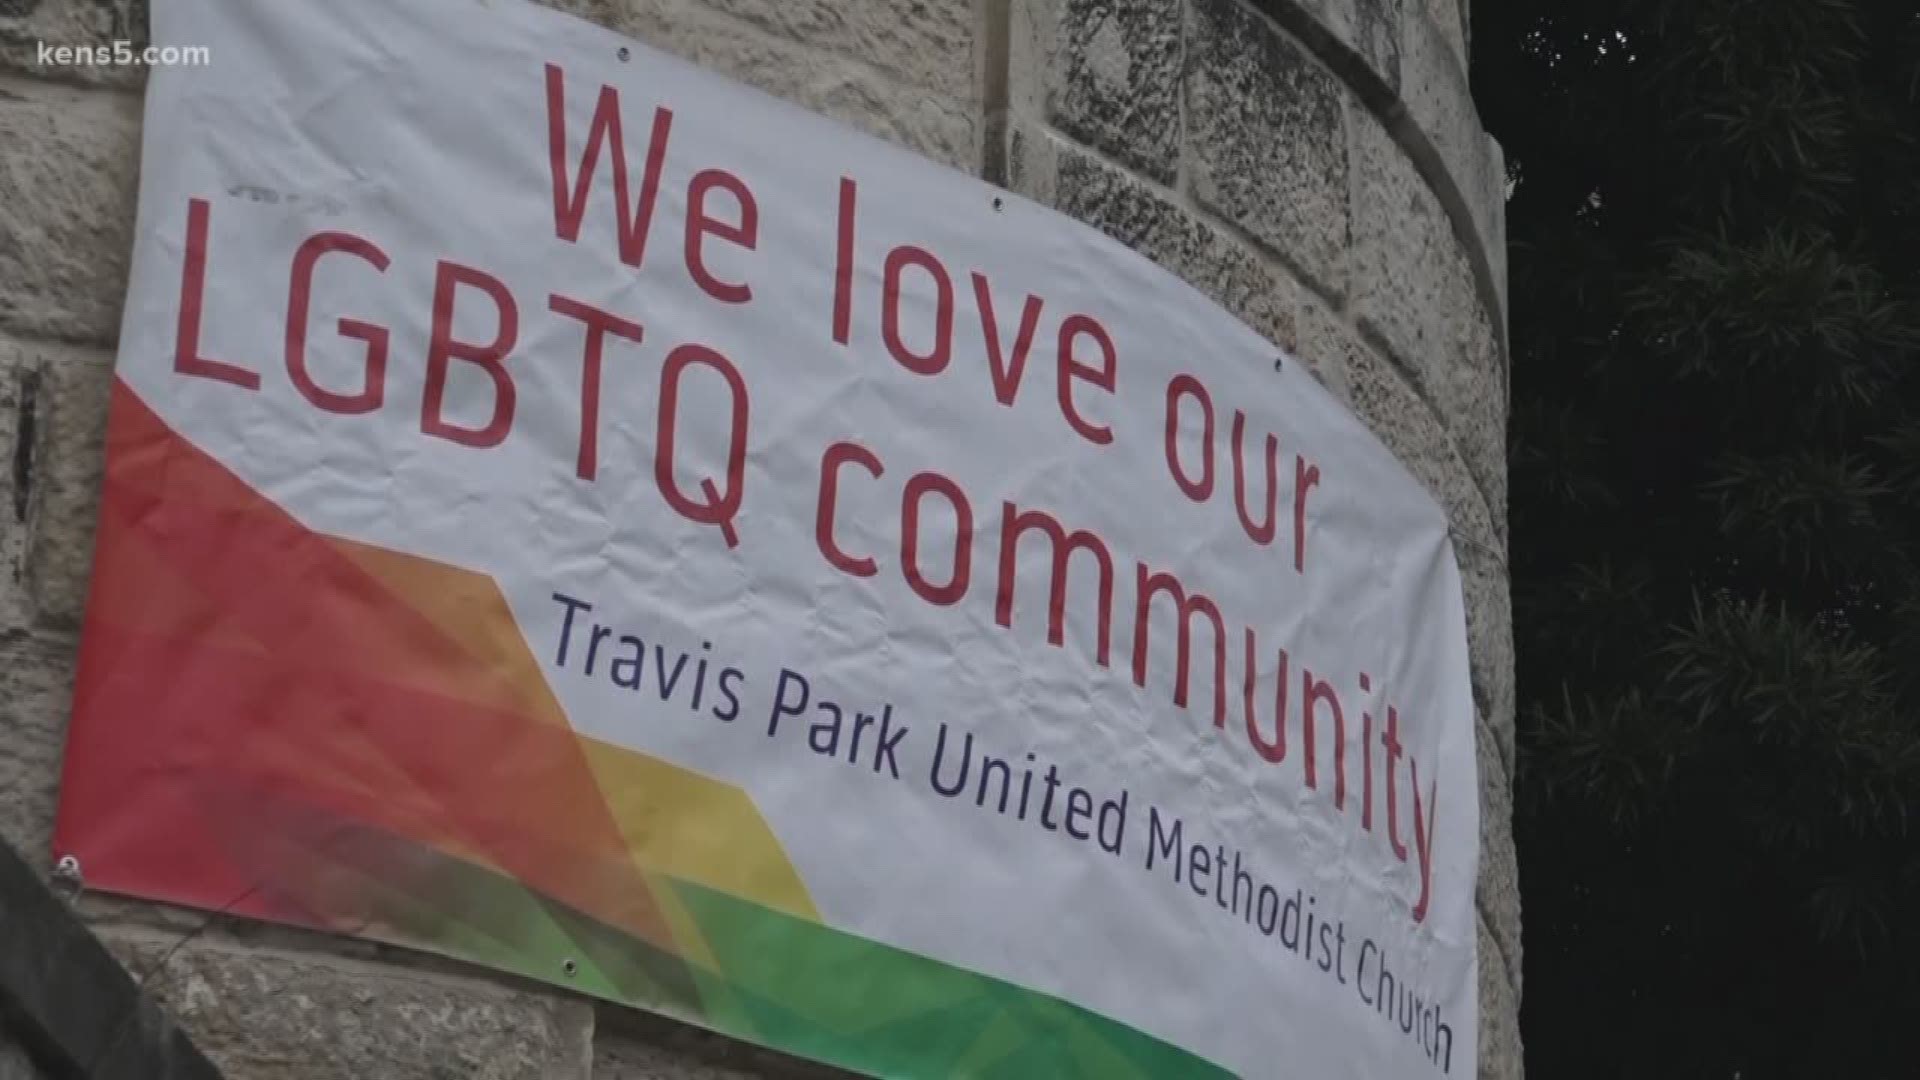 At a general conference earlier this week, the church rejected a vote to recognize gay marriage and gay ordained clergy members. Eyewitness News reporter Jaleesa Irizarry finds out what this means for churches here in San Antonio.